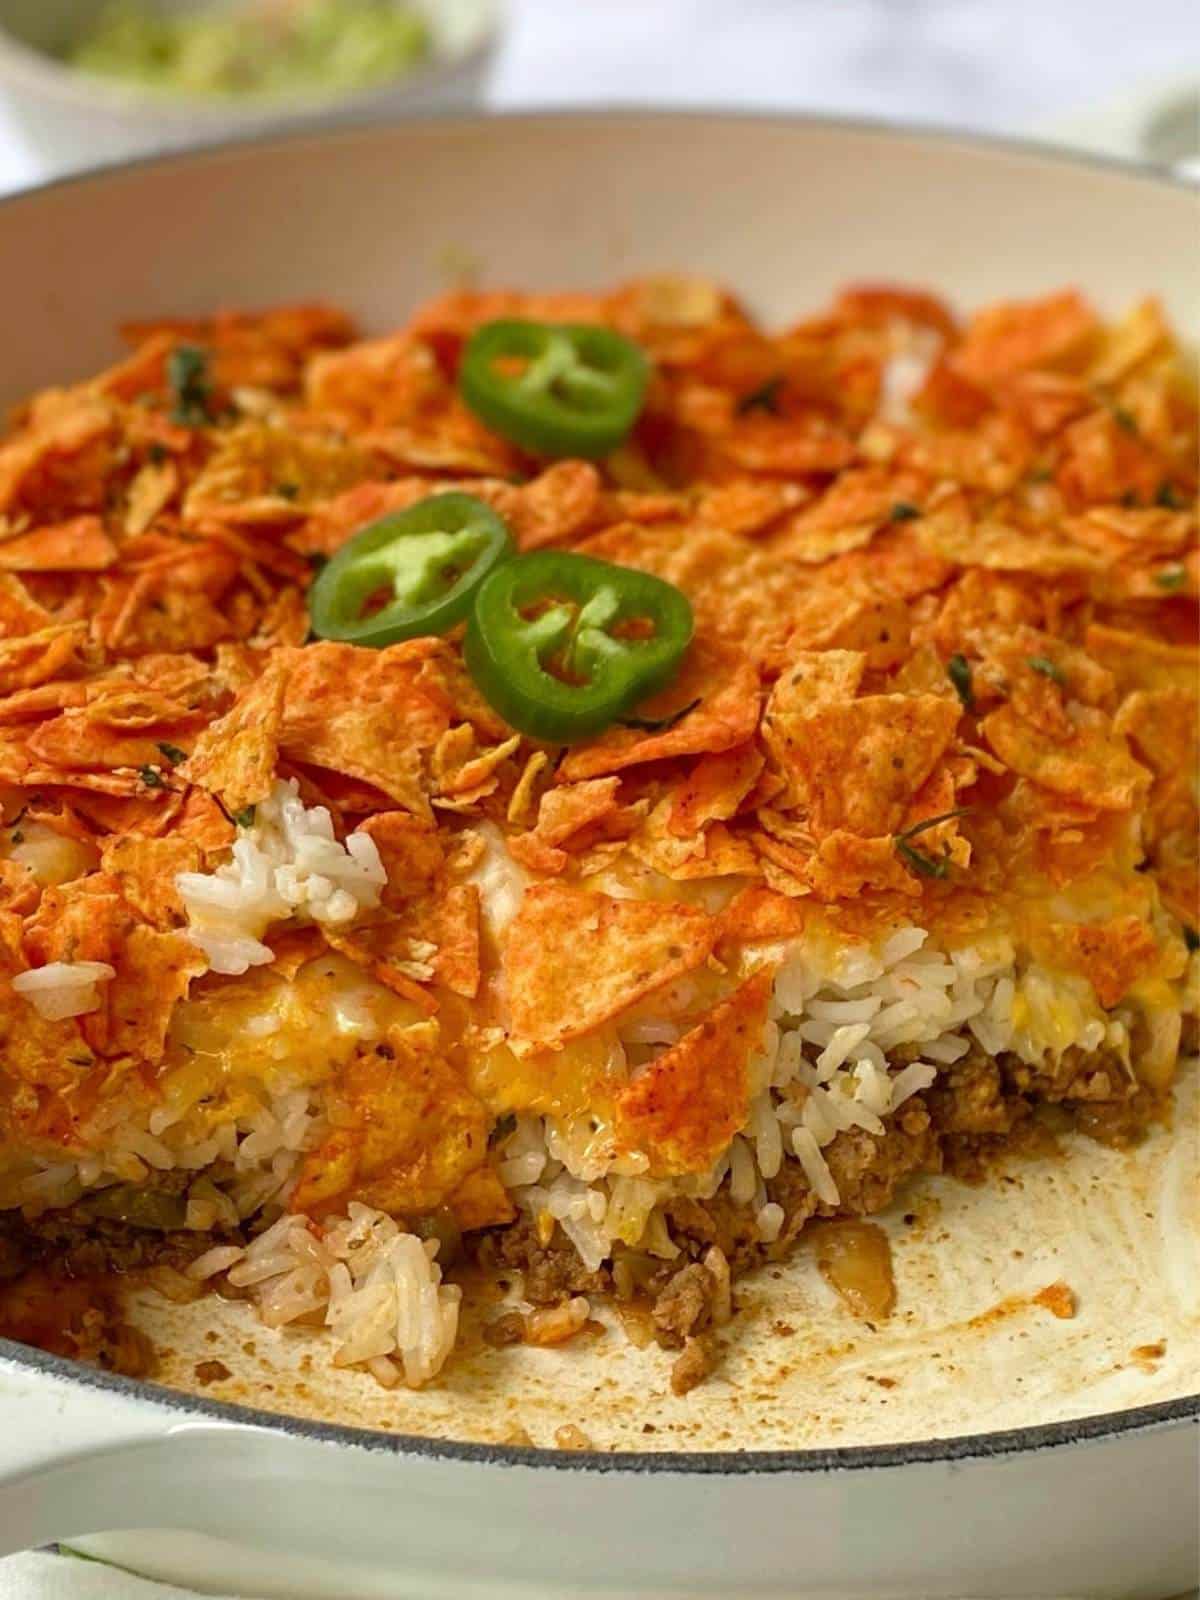 close up side view of partially eaten taco casserole.